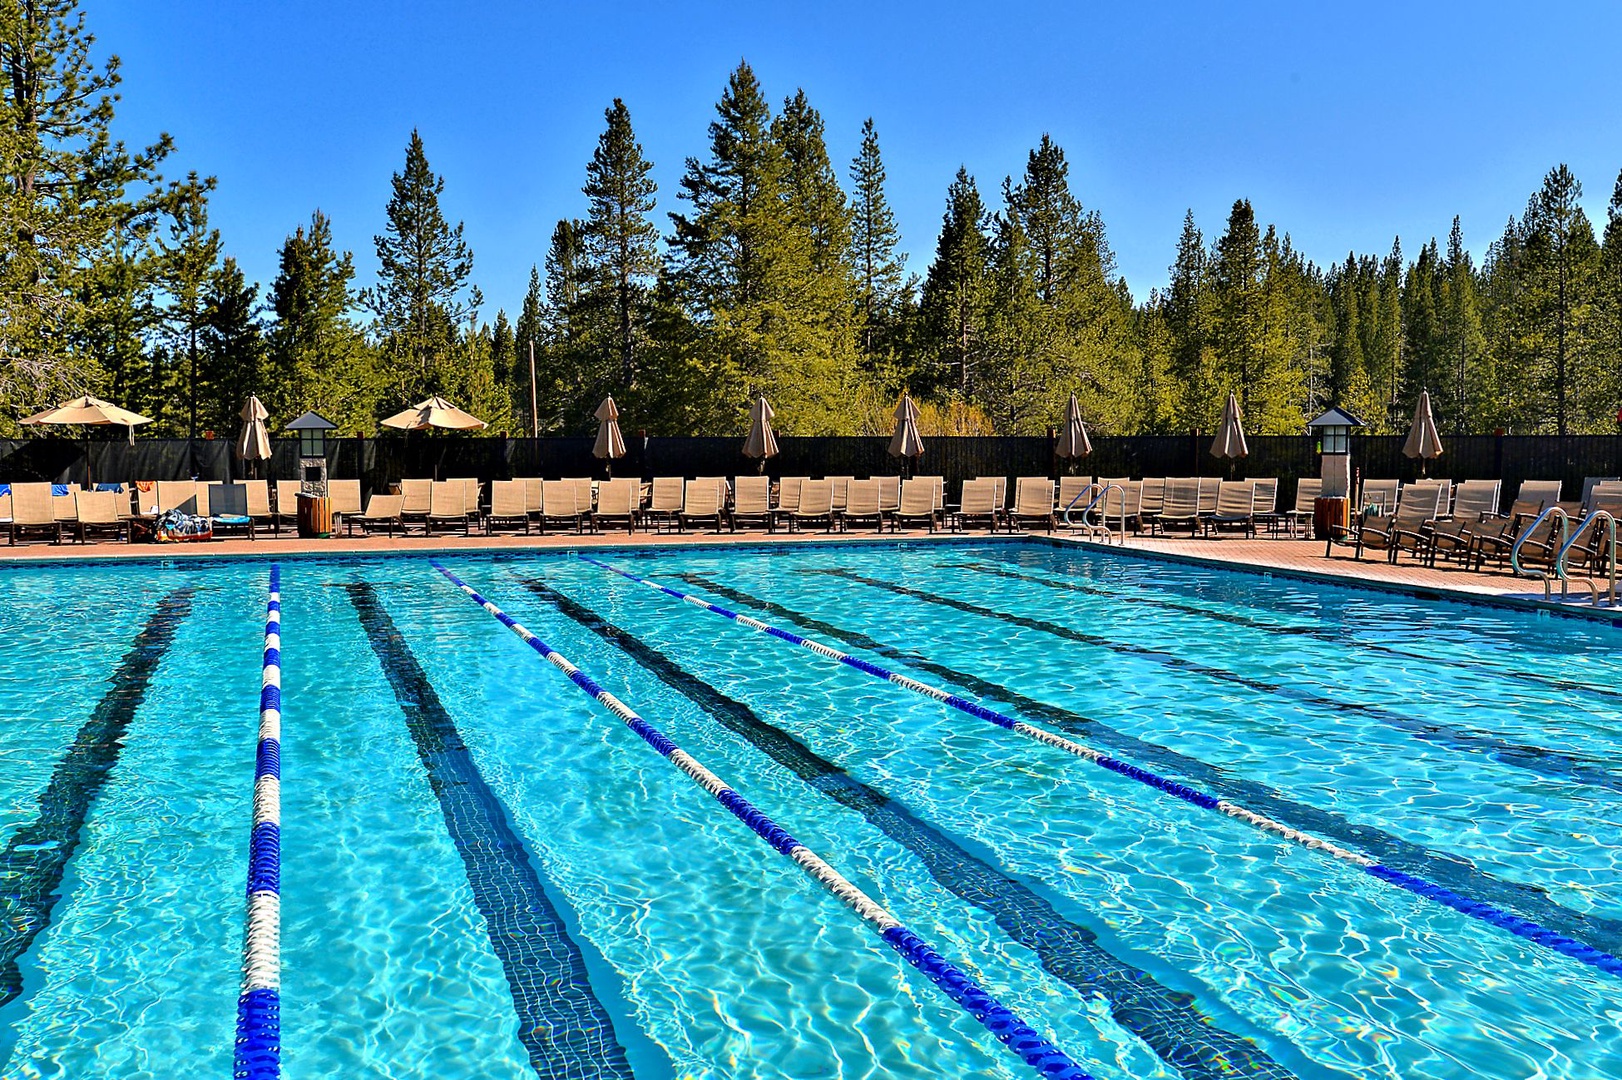 Lap Pool at the Rec Center: Tahoe Donner Creel Side Retreat with Hot Tub